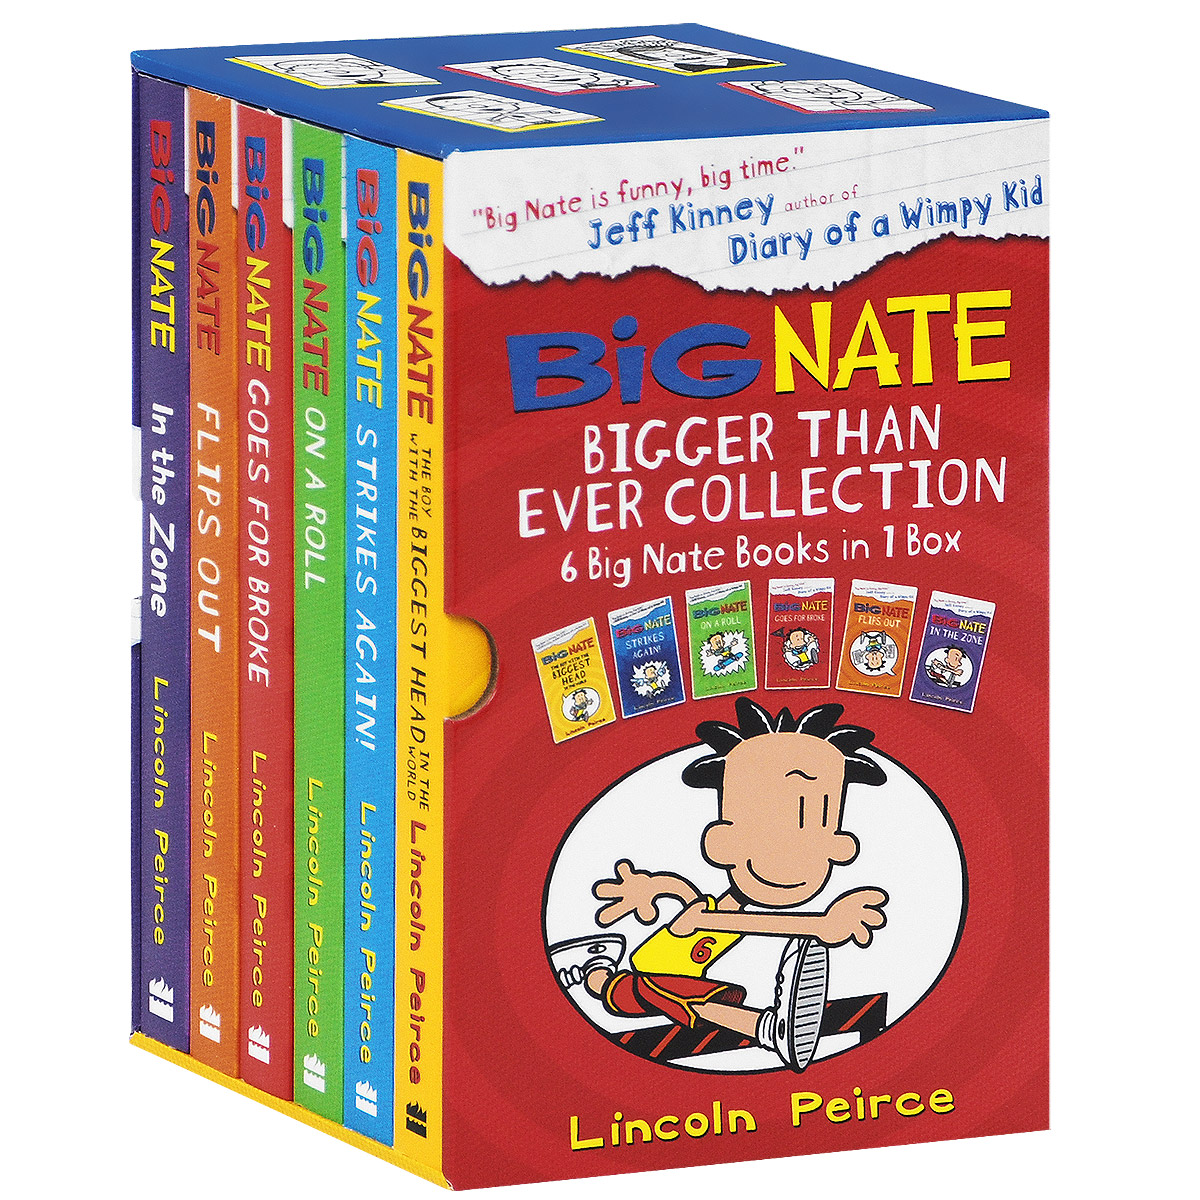 Big Nate: Bigger Than Ever Collection: 6 Big Nate Books in 1 Box